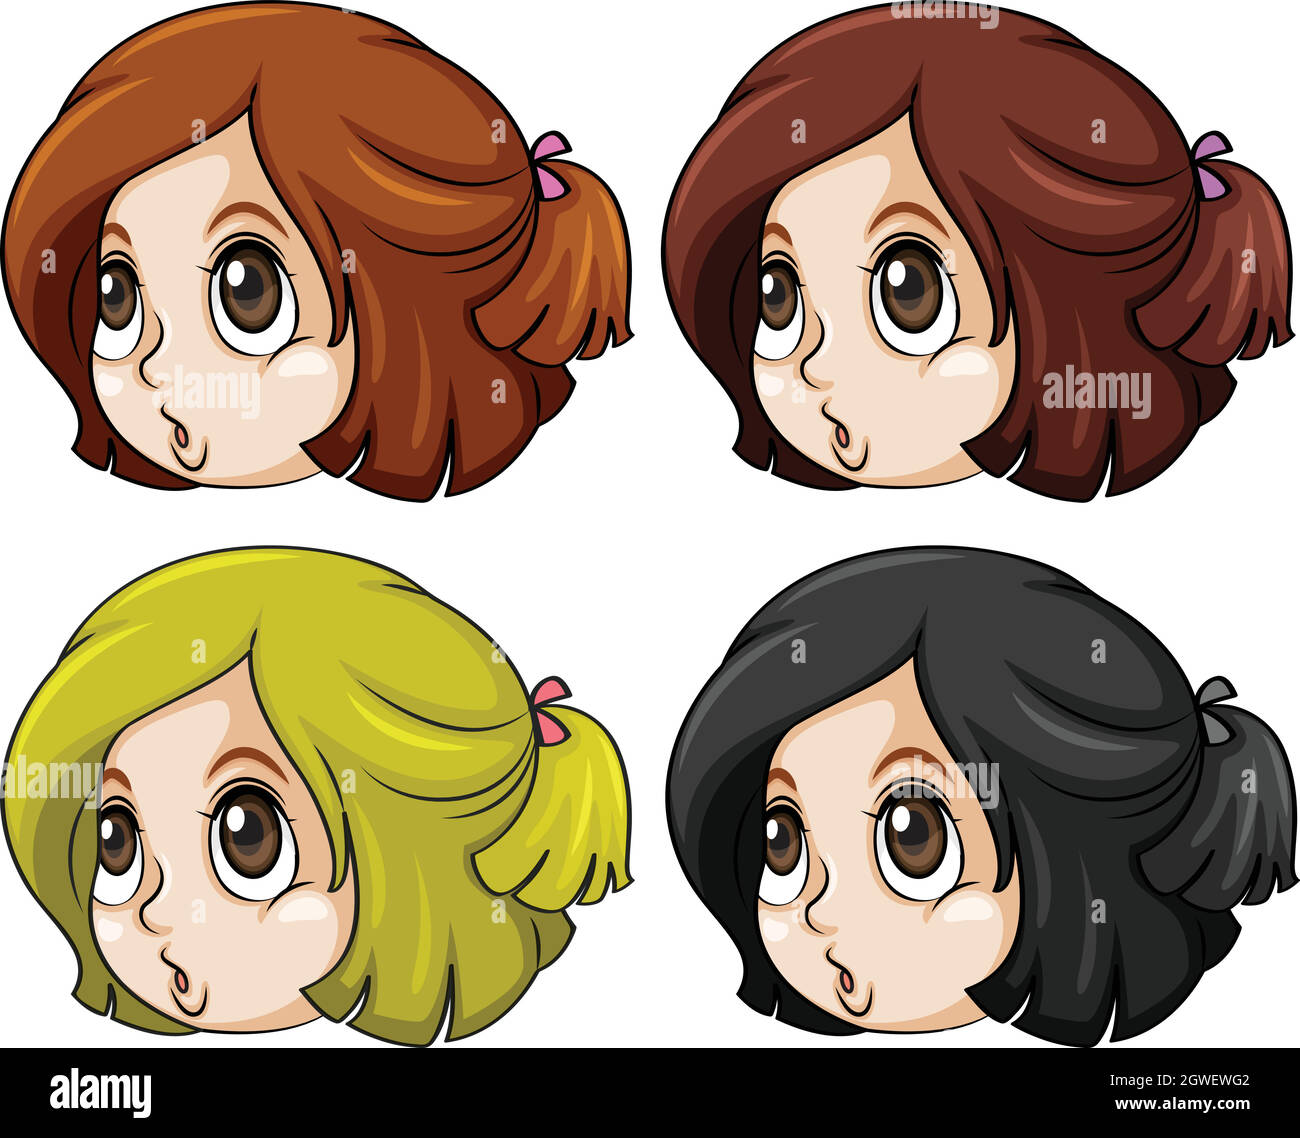 Girls with different hair colors Stock Vector